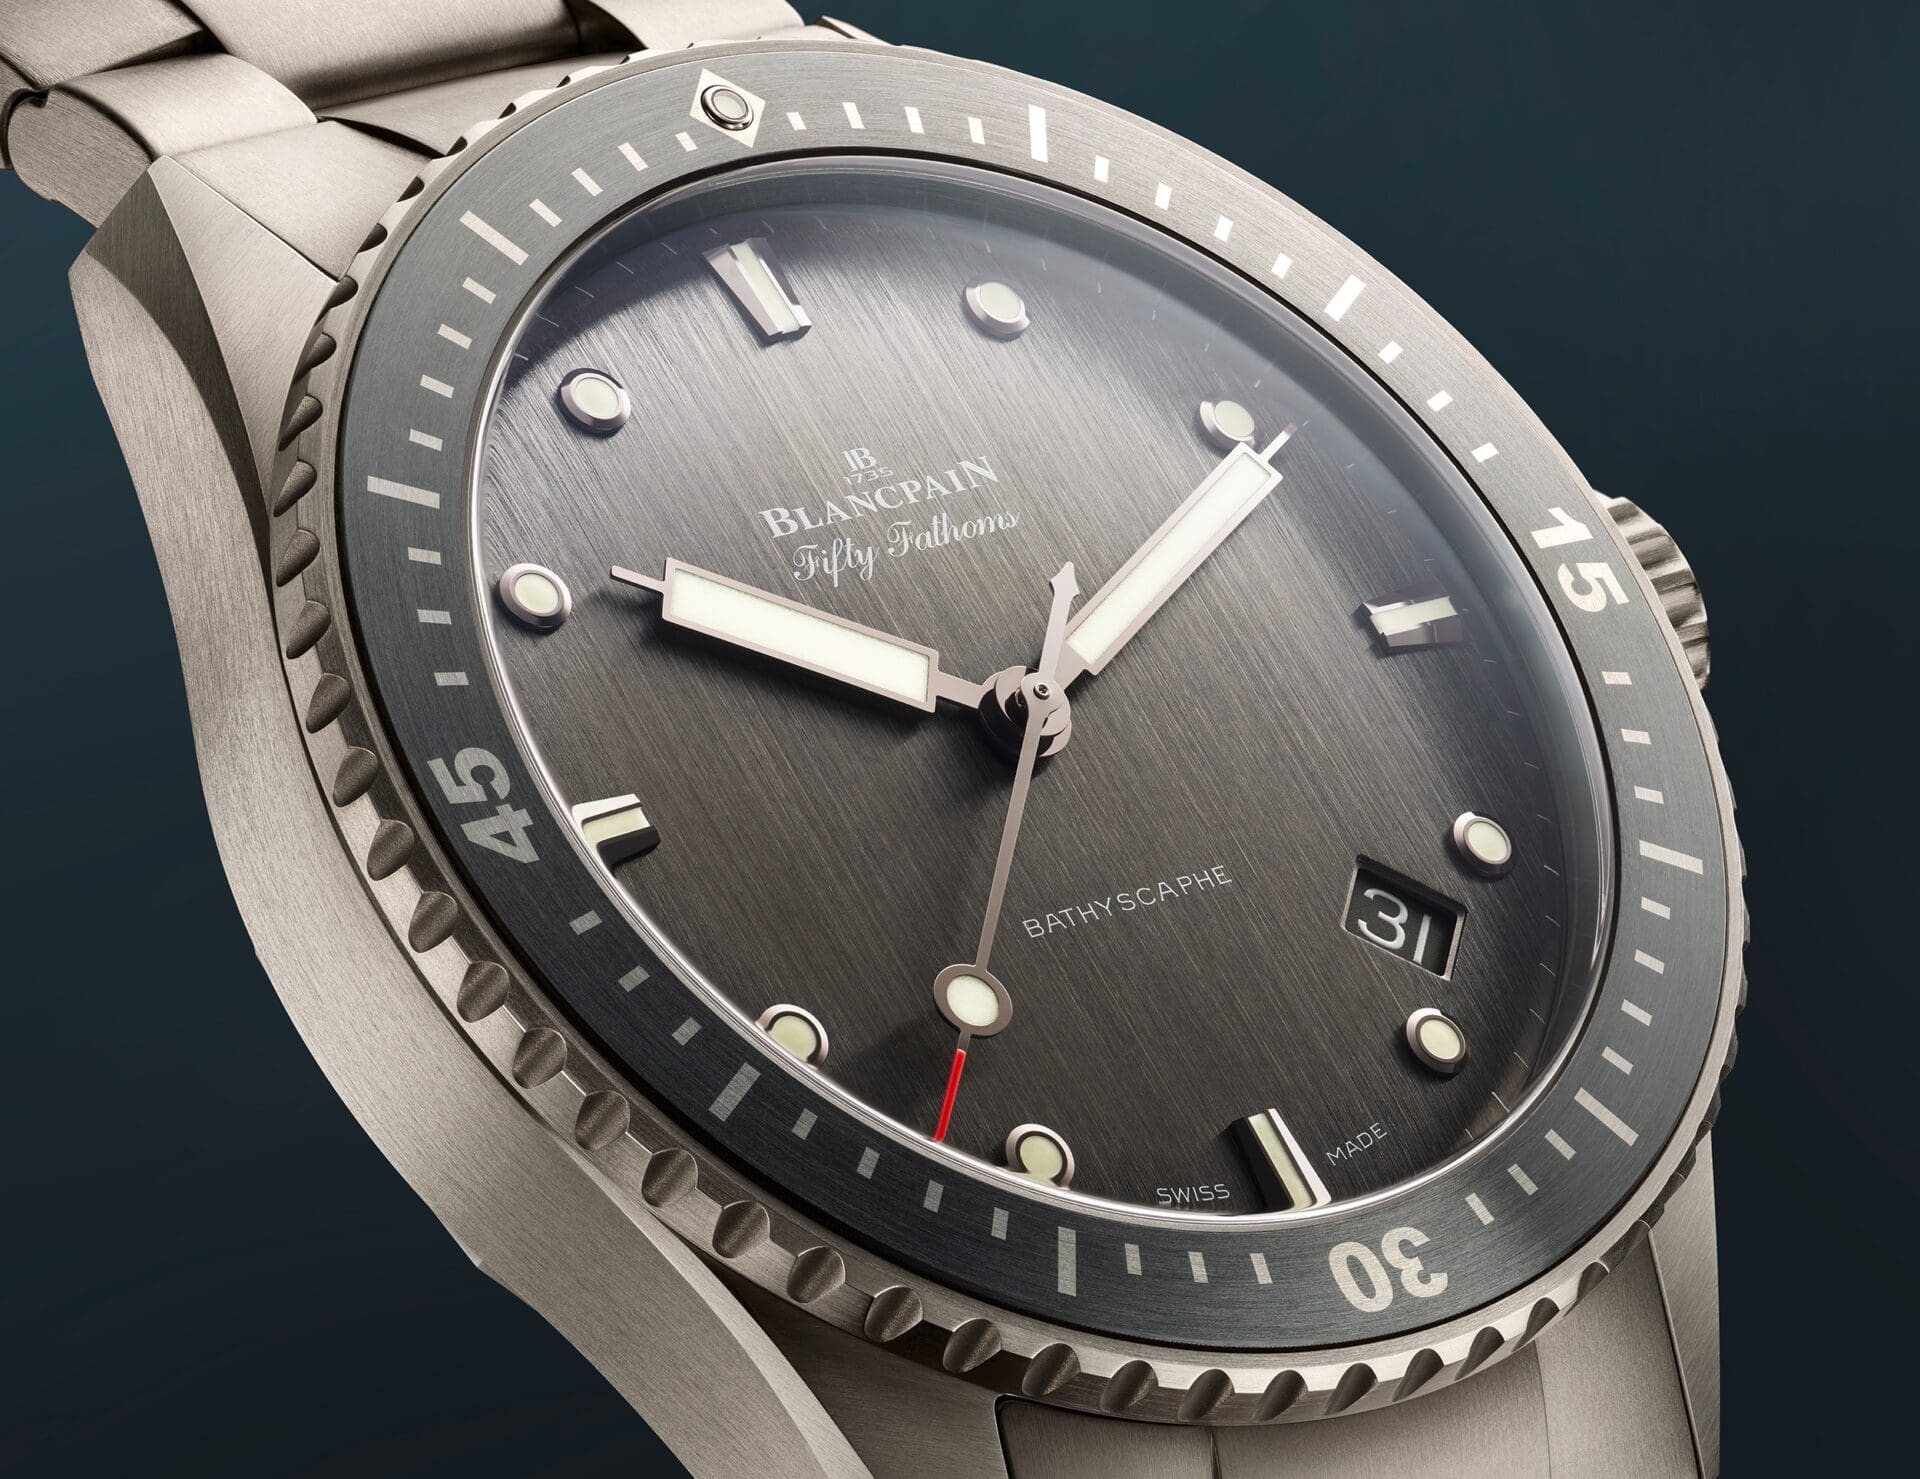 INTRODUCING: The Blancpain Bathyscaphe Titanium is a sexy beast of a dive watch